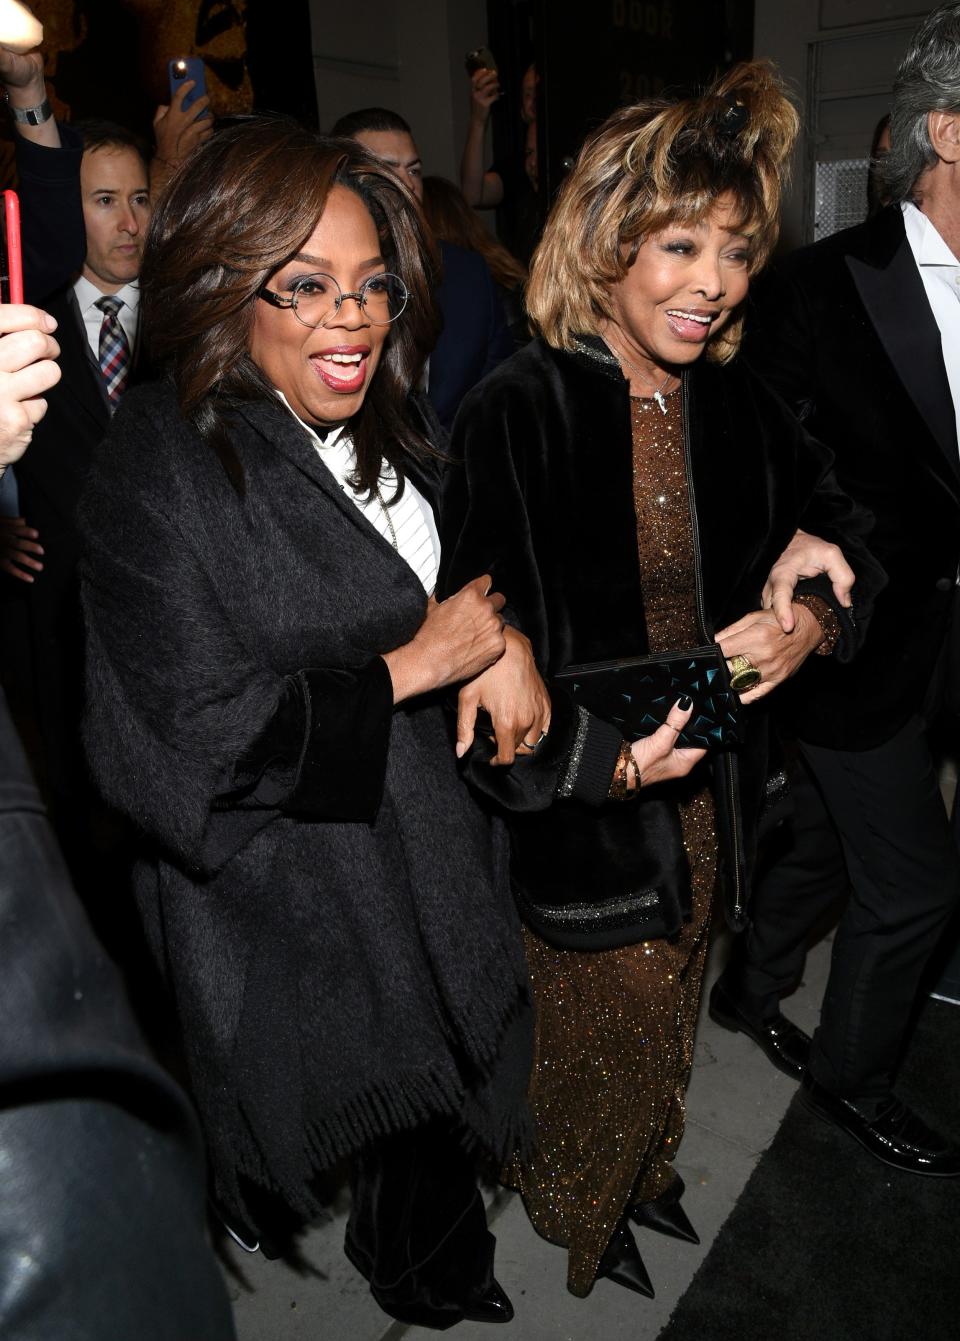 Tina Turner arrives with Oprah Winfrey and husband Erwin Bach for the opening night of "Tina - The Tina Turner Musical."